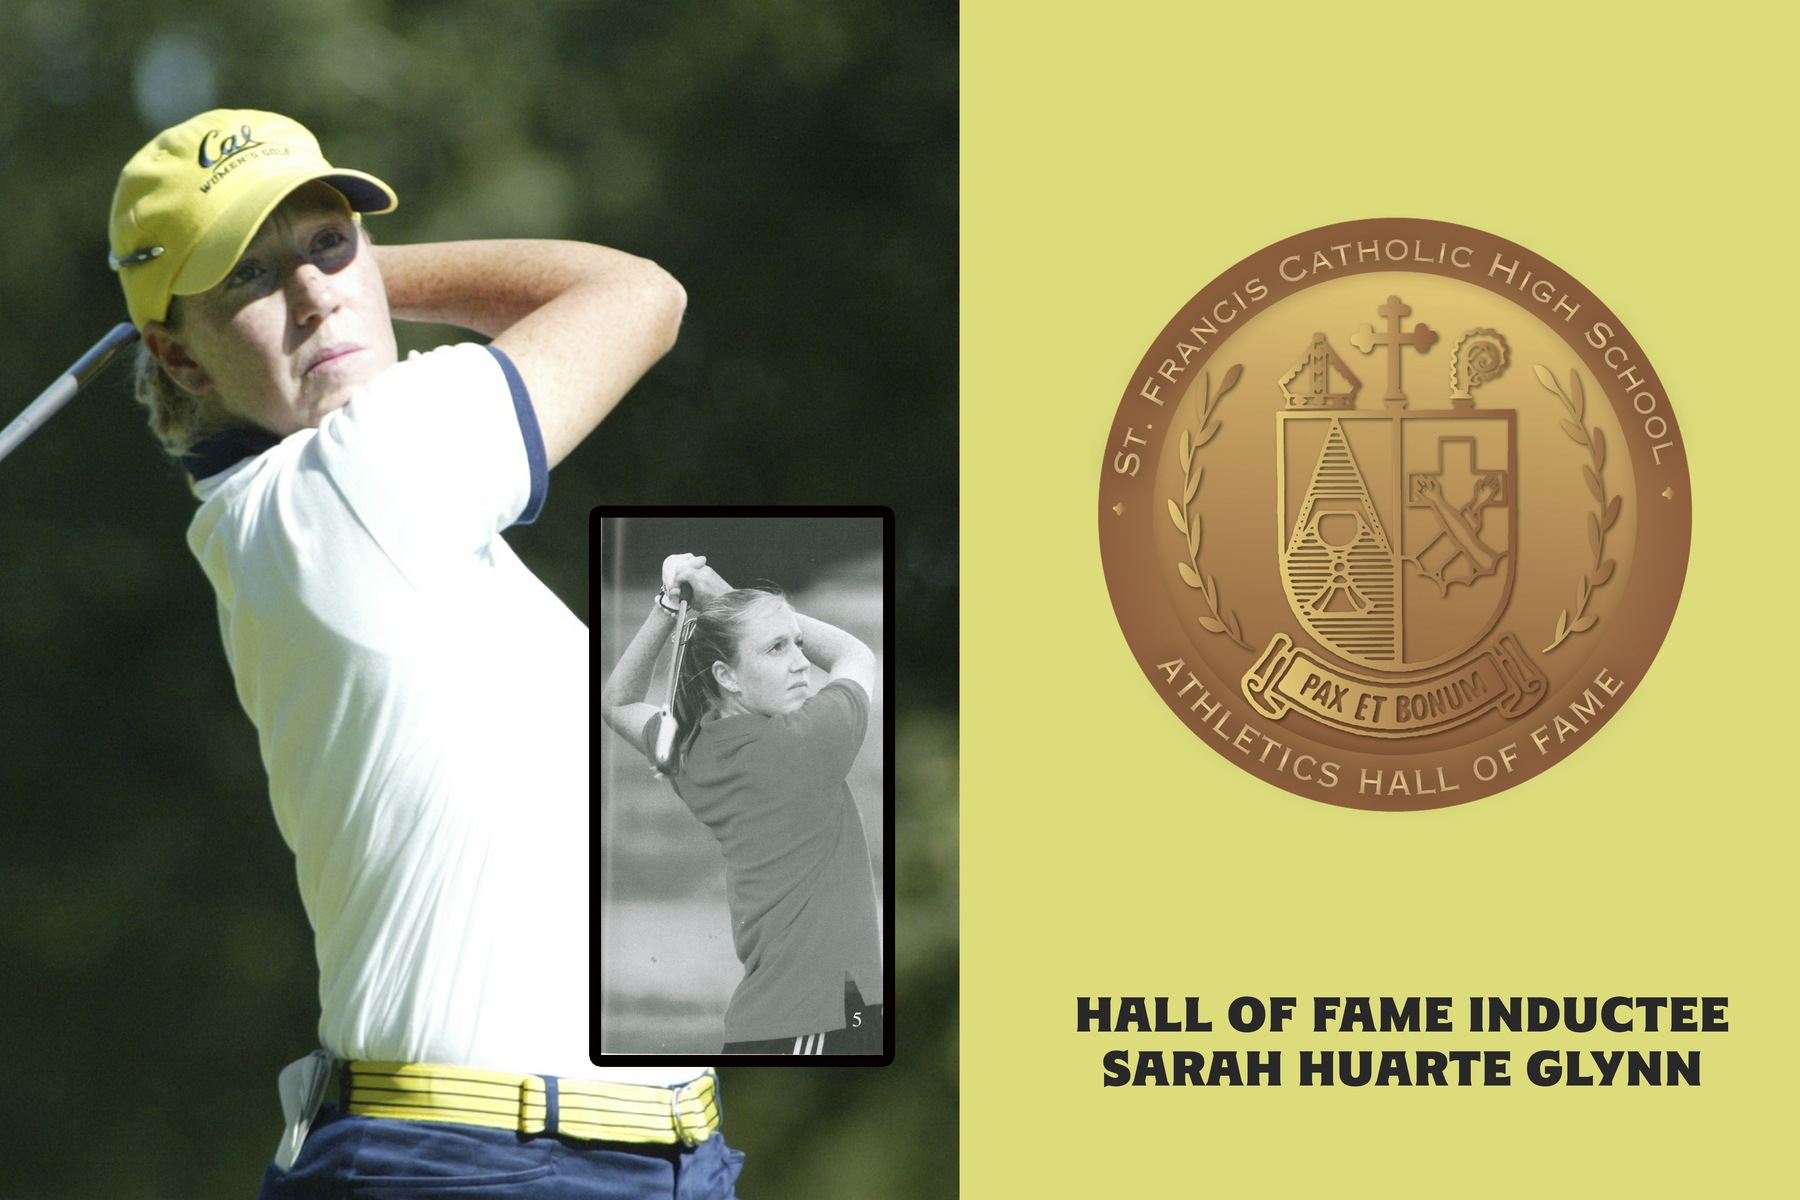 Former Golfer Sarah Huarte Glynn Selected to First Athletics Hall of Fame Class